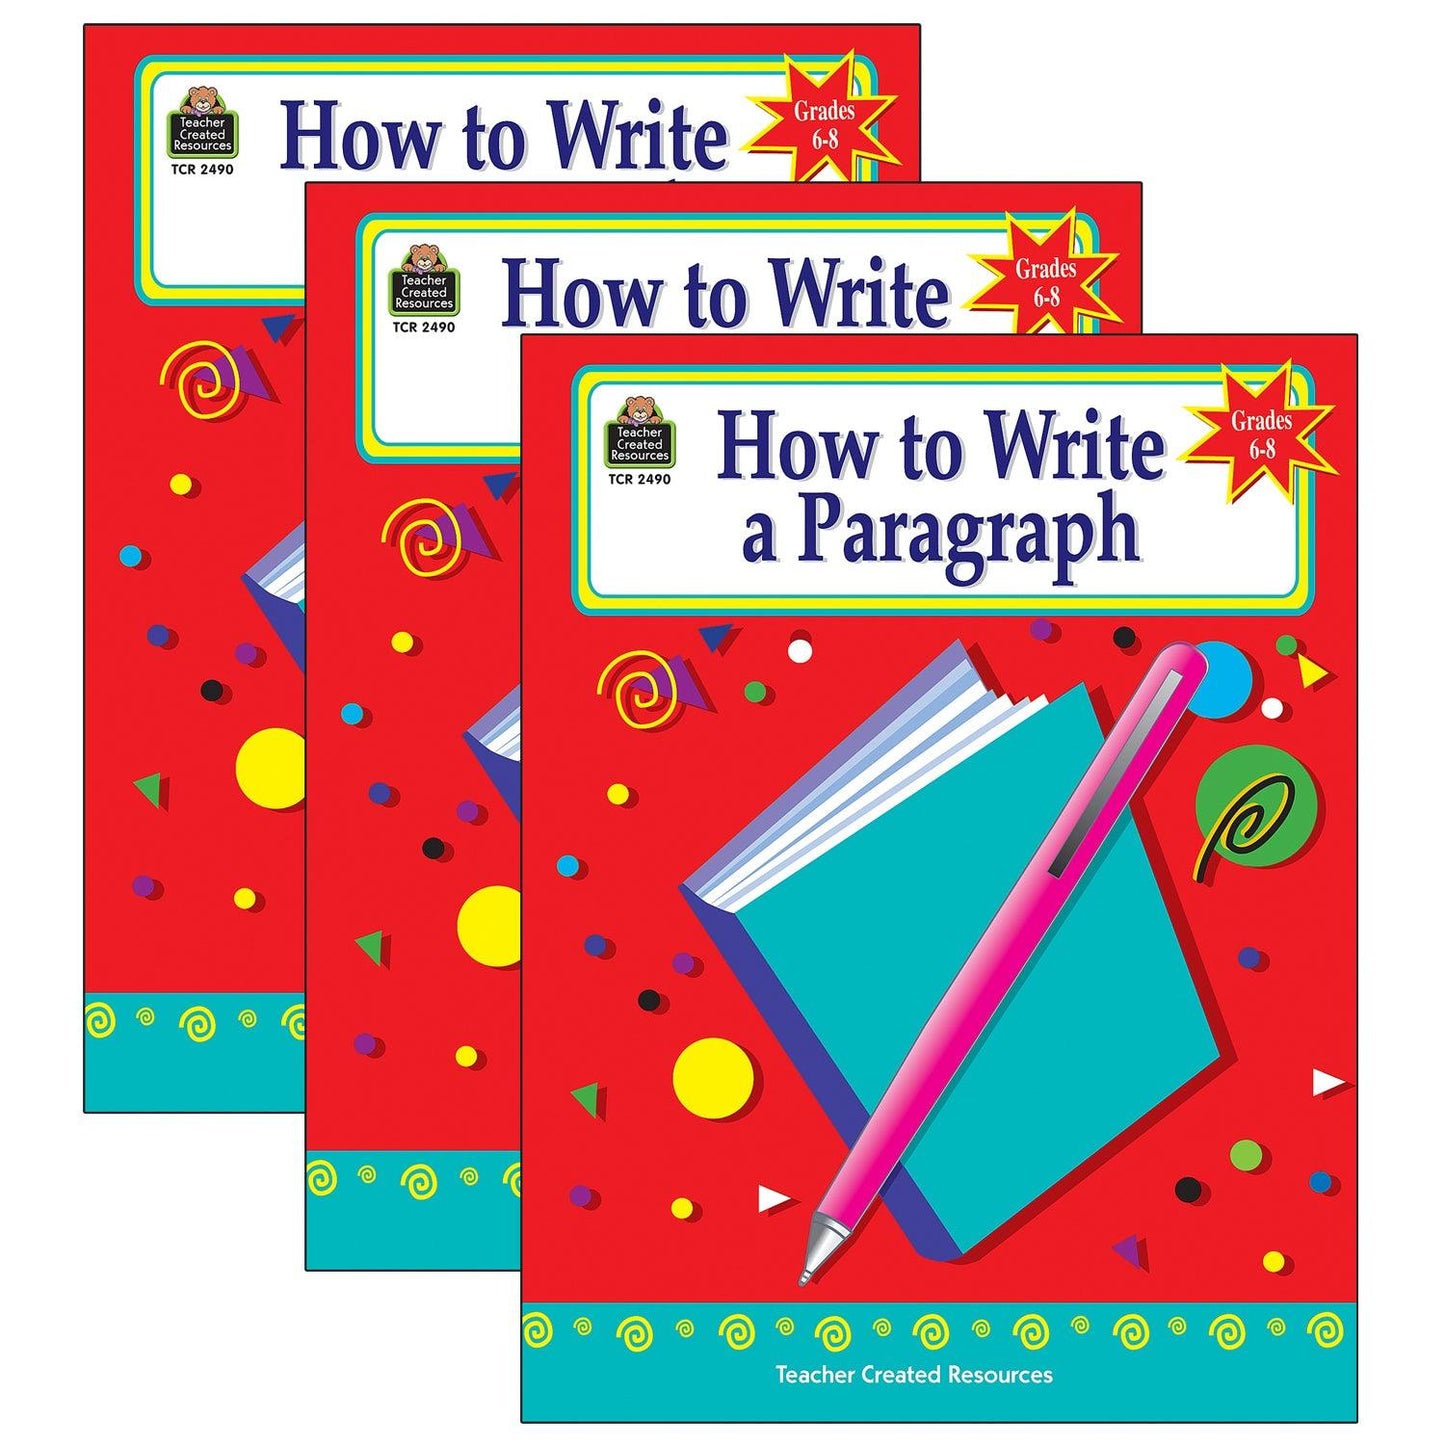 How to Write a Paragraph Activity Book, Grade 6-8, Pack of 3 - Loomini